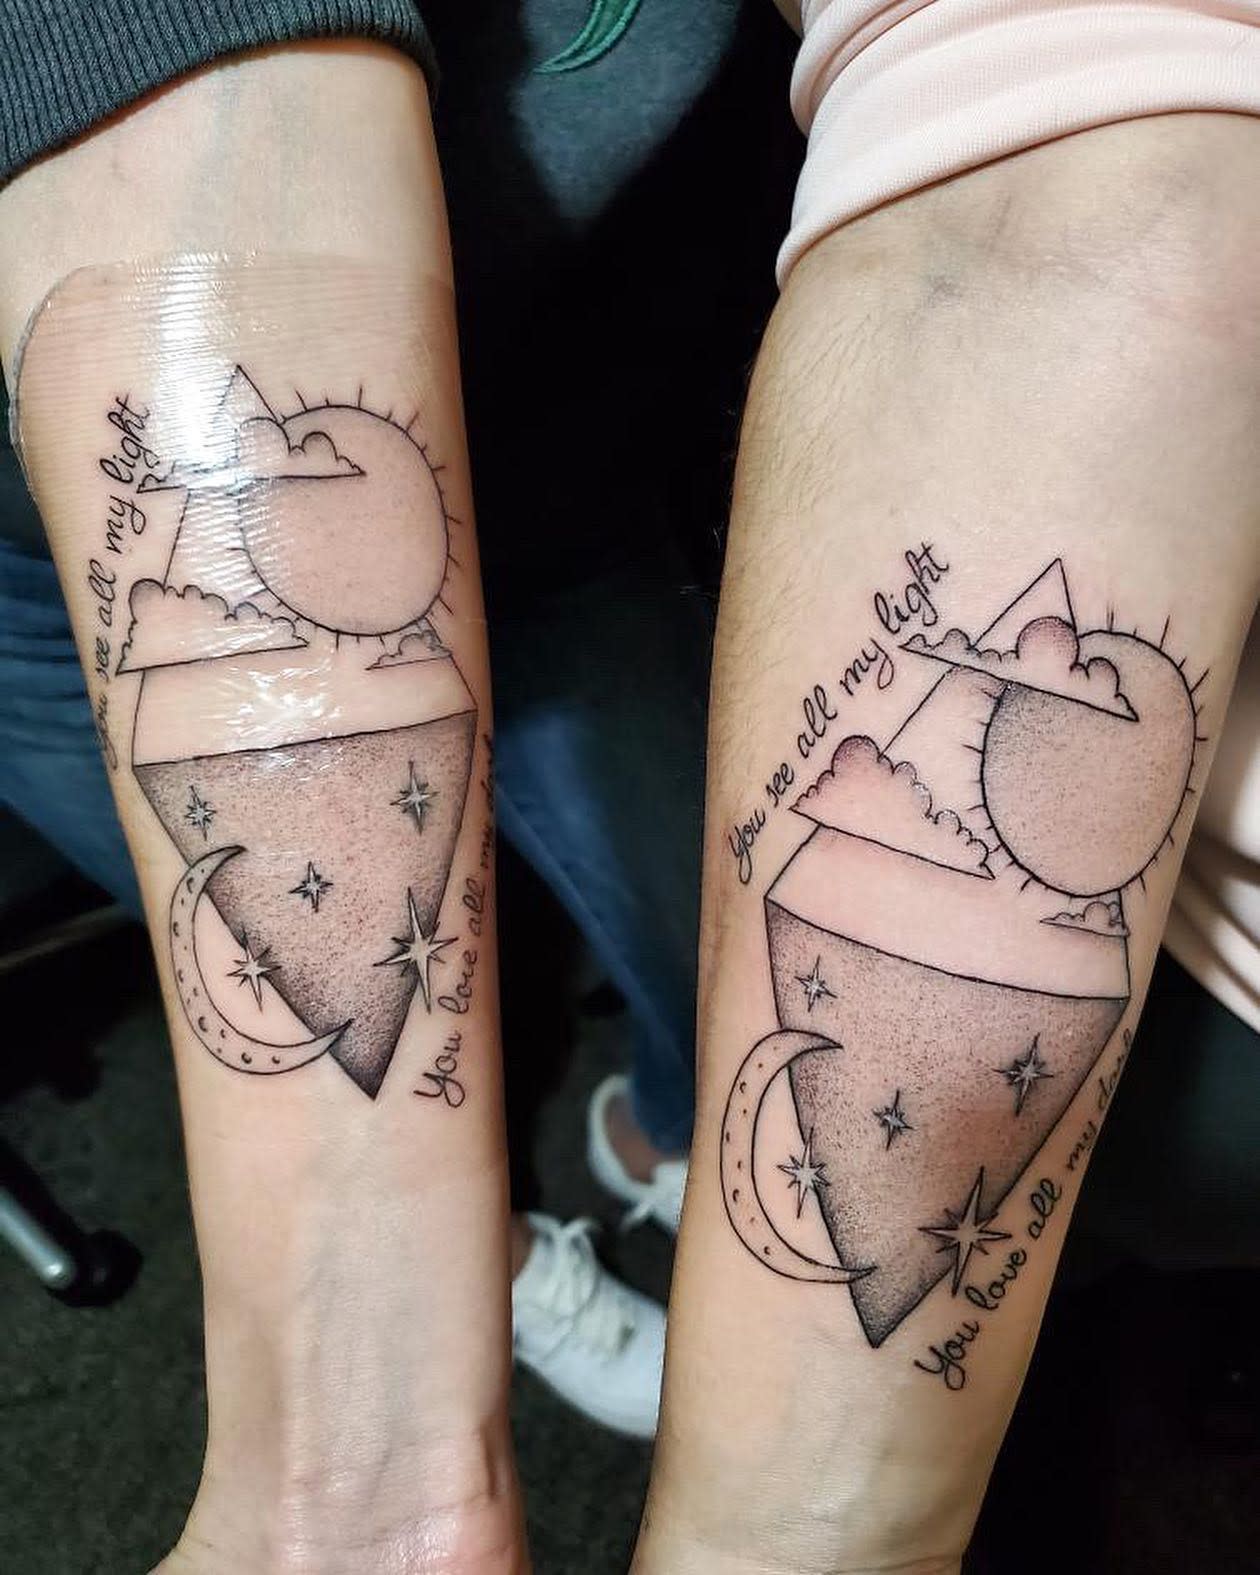 Triangle tattoo for siblings, representing age order